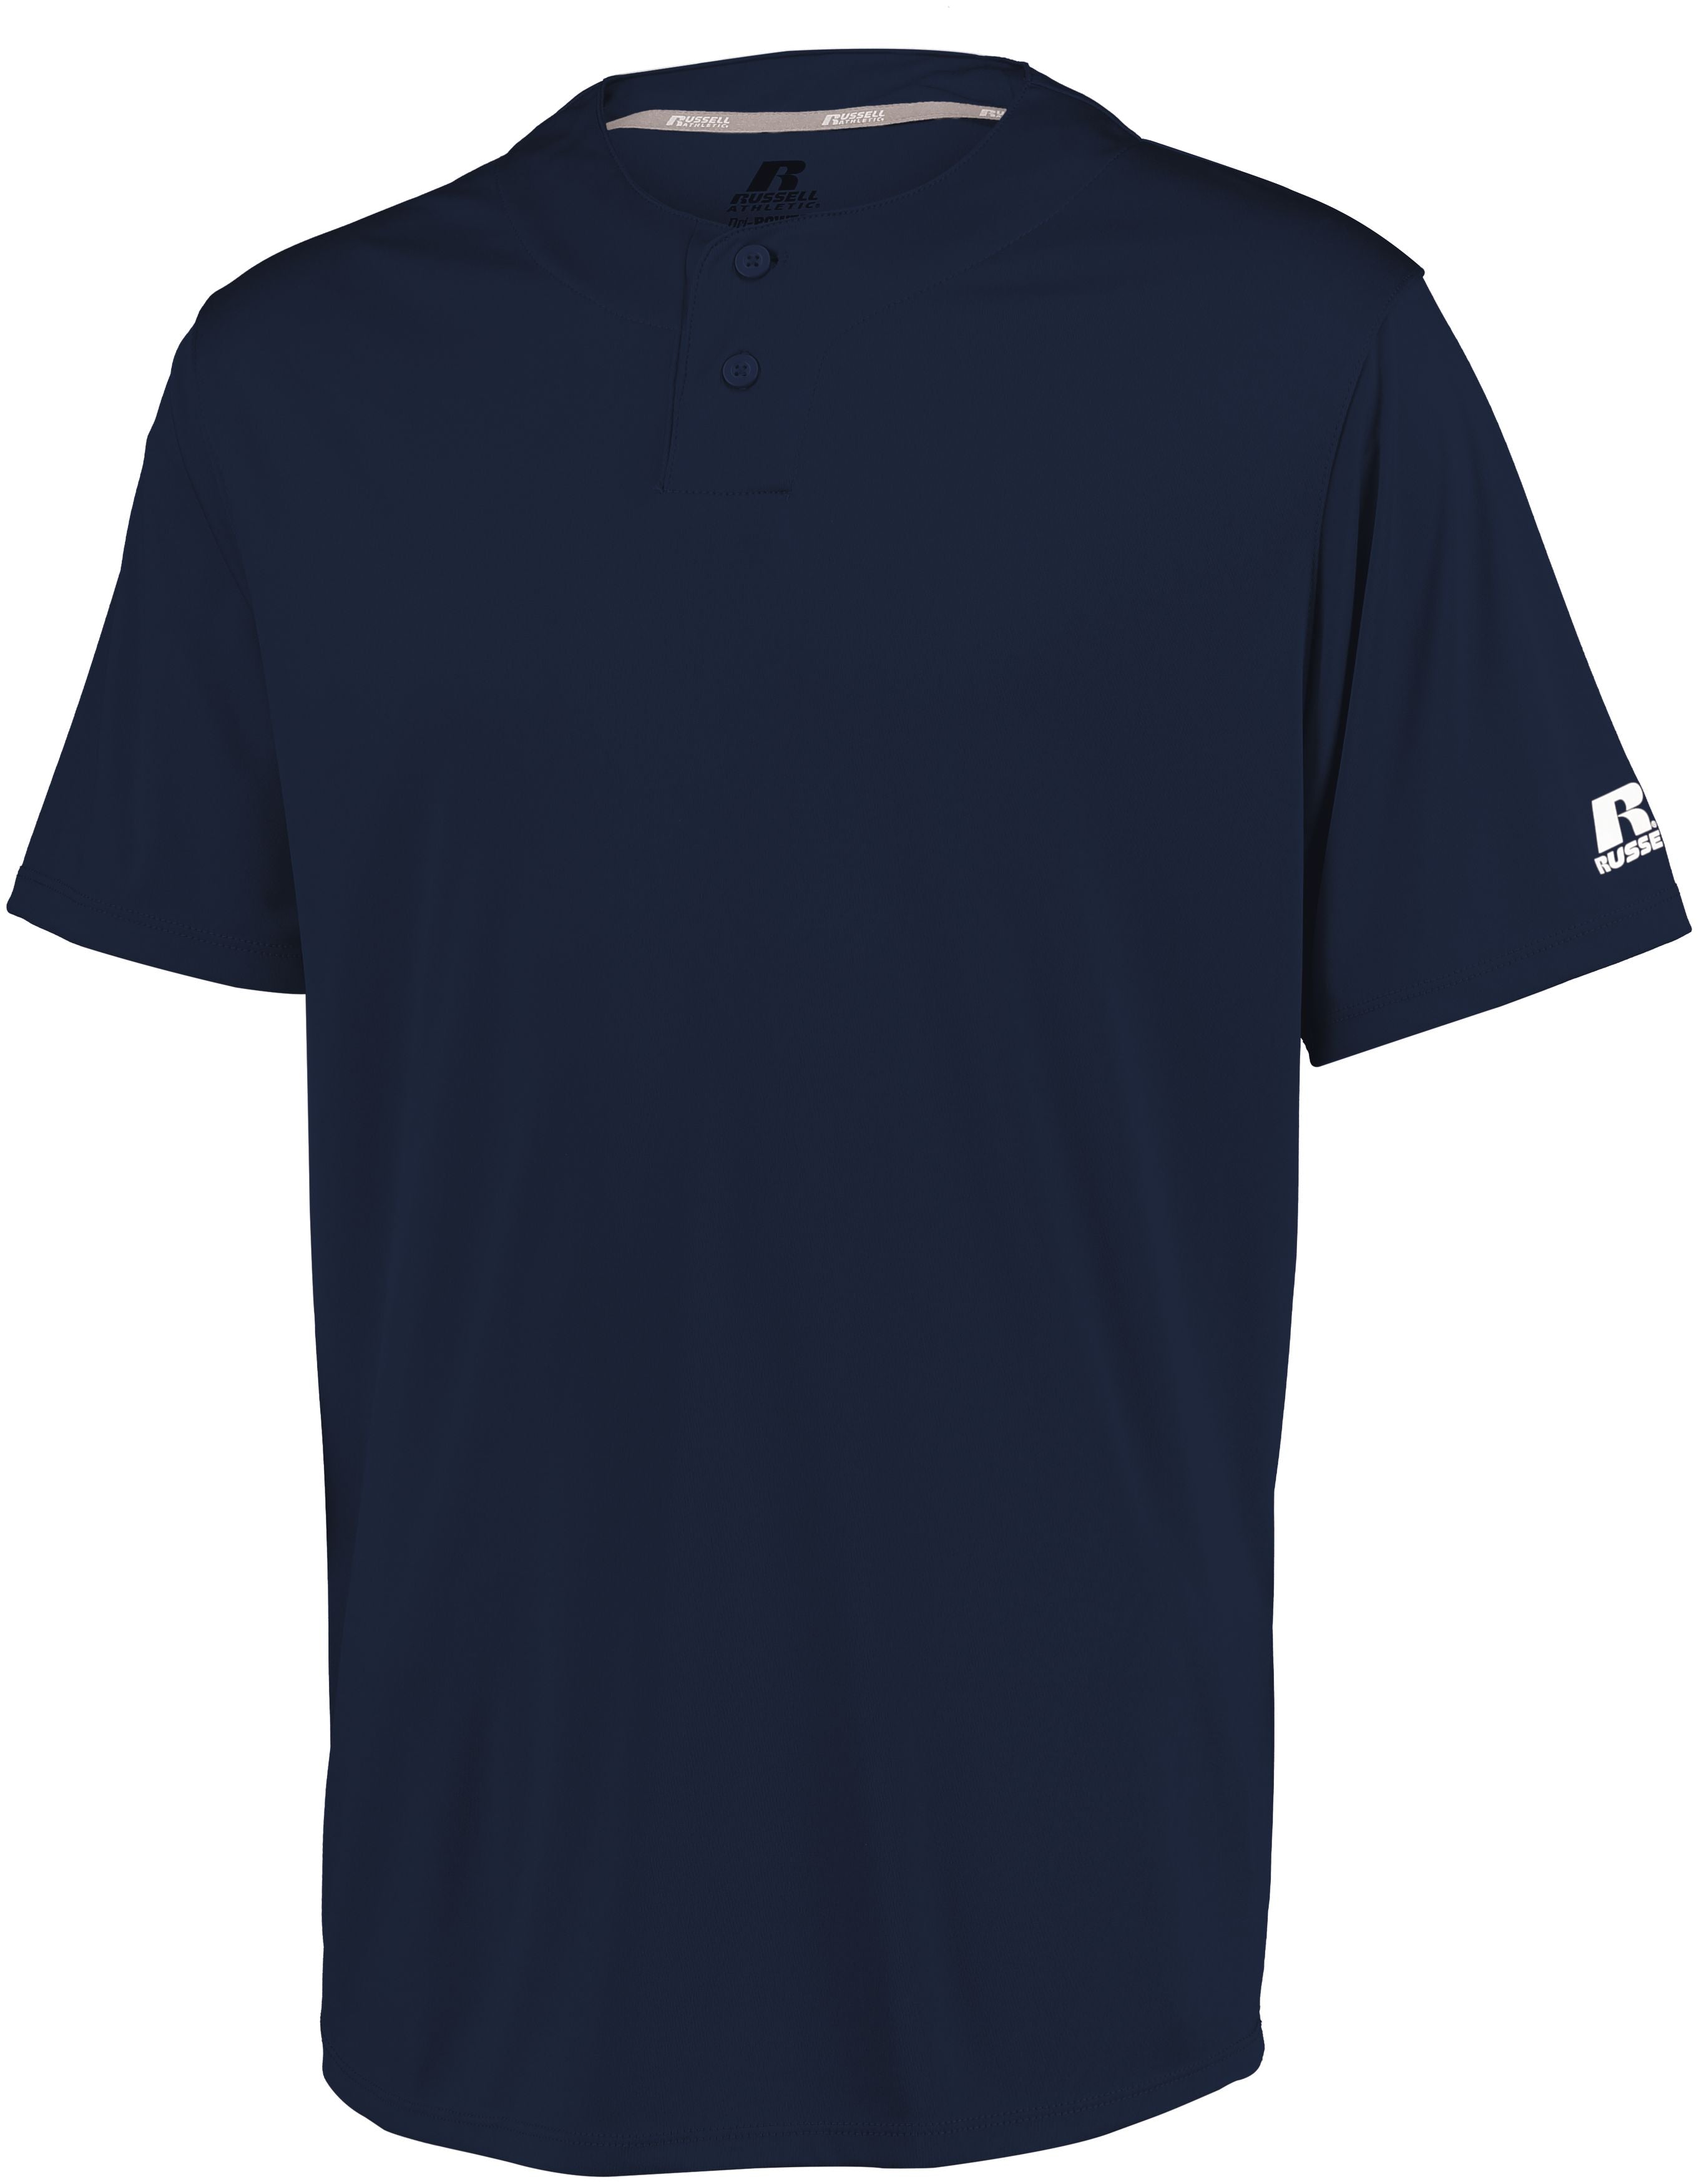 Russell Athletic Youth Performance Two-Button Solid Jersey in Navy  -Part of the Youth, Youth-Jersey, Baseball, Russell-Athletic-Products, Shirts, All-Sports, All-Sports-1 product lines at KanaleyCreations.com